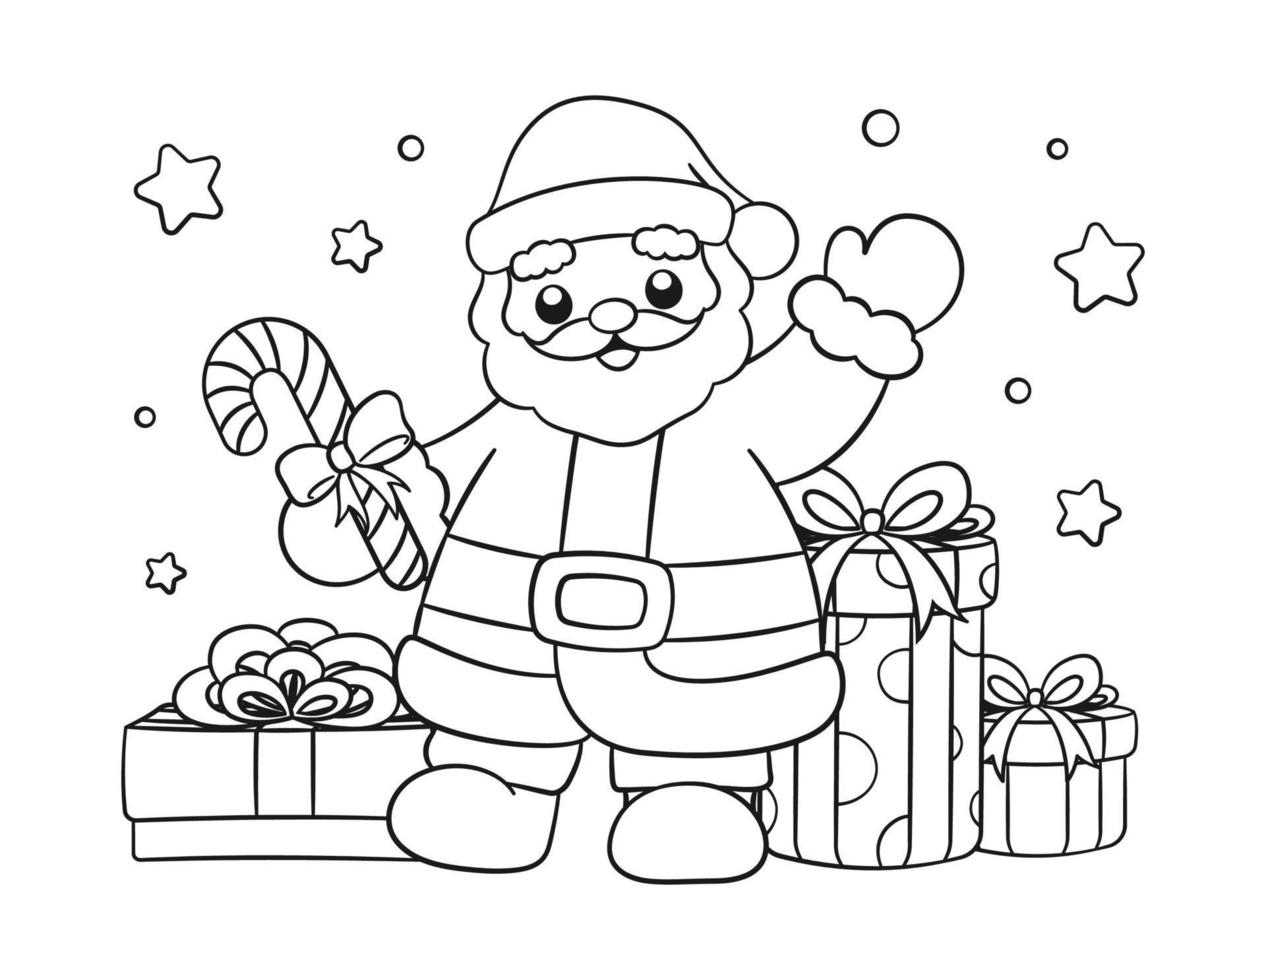 Santa Claus with gifts and candy cane outline line art doodle cartoon illustration. Winter Christmas theme coloring book page activity for kids and adults. vector